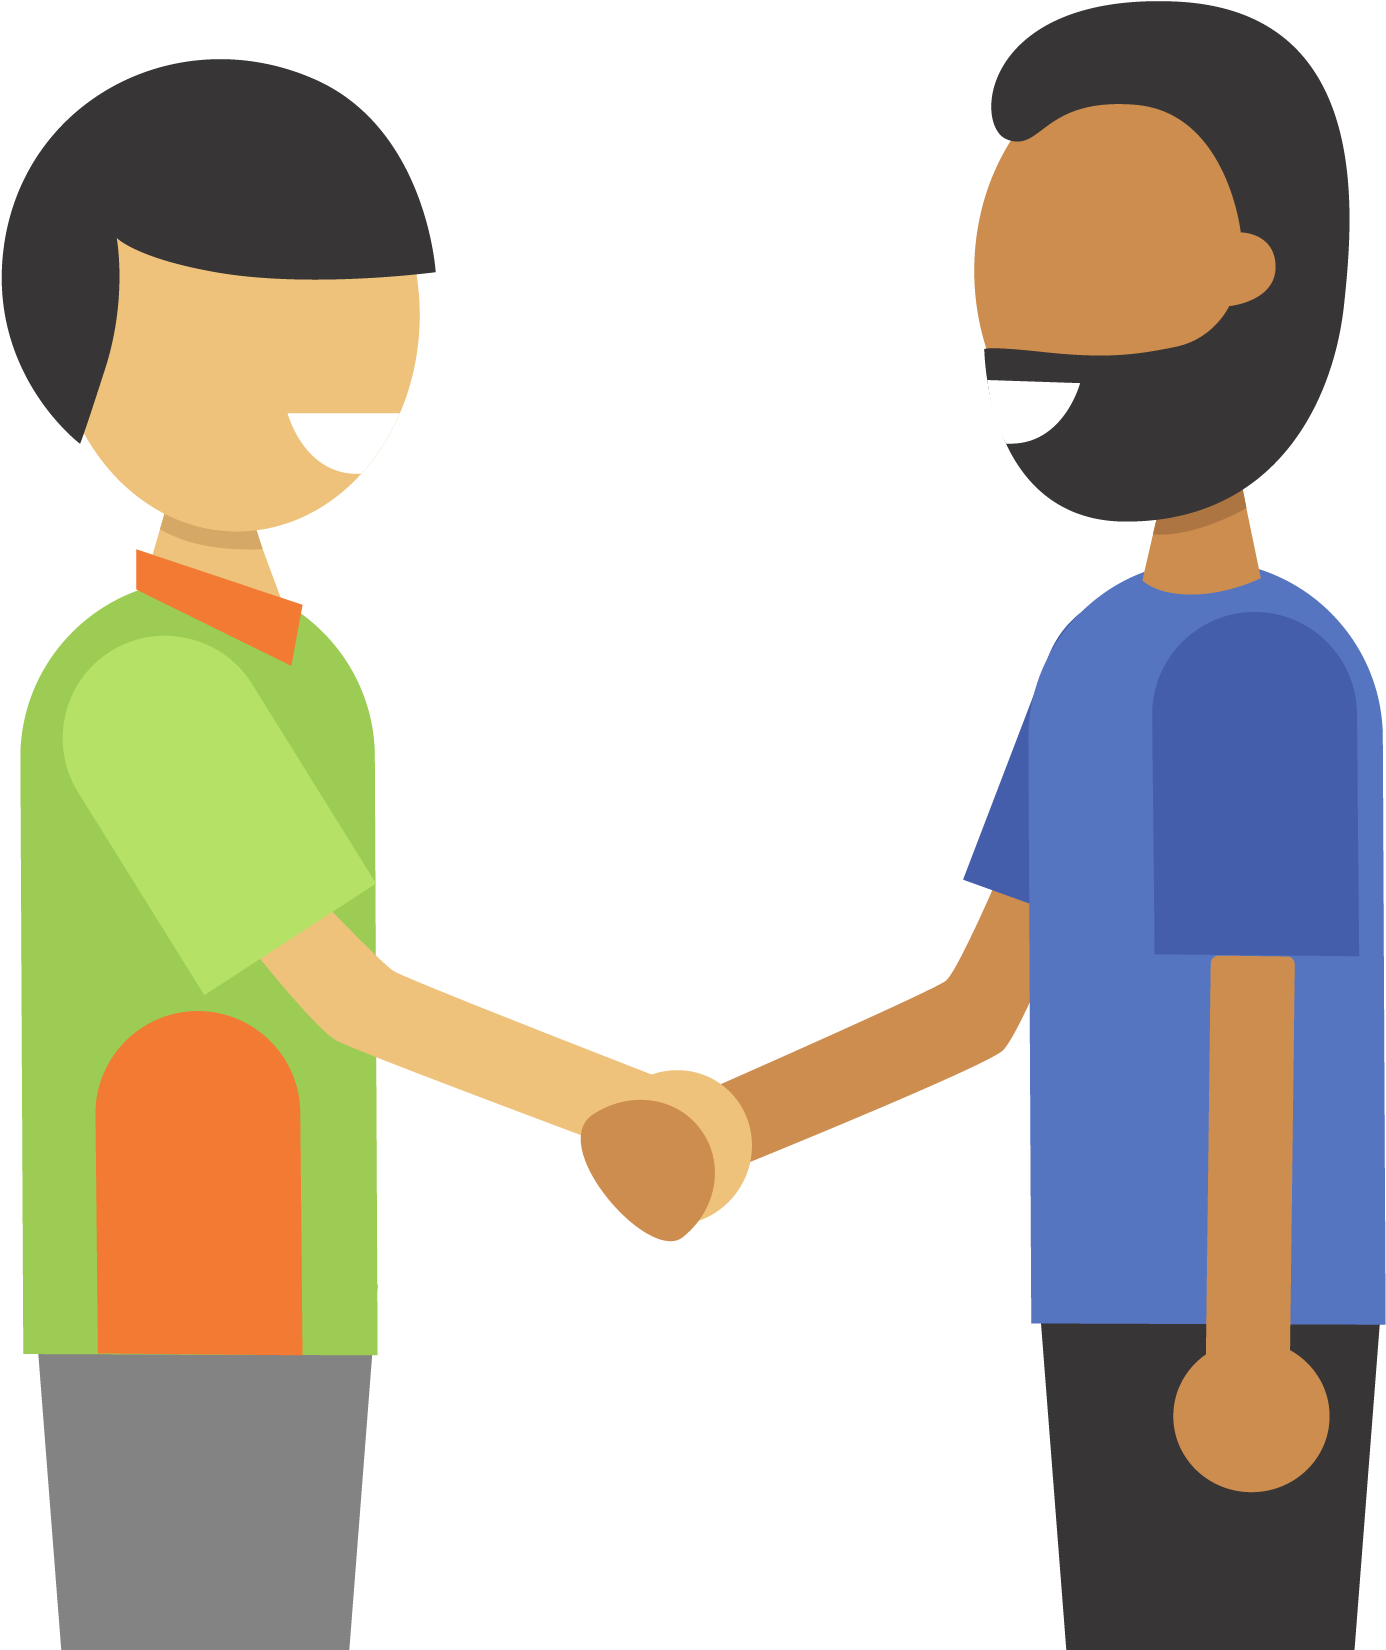 Illustration Of Two People Shaking Hands - Illustration (1851x2251)